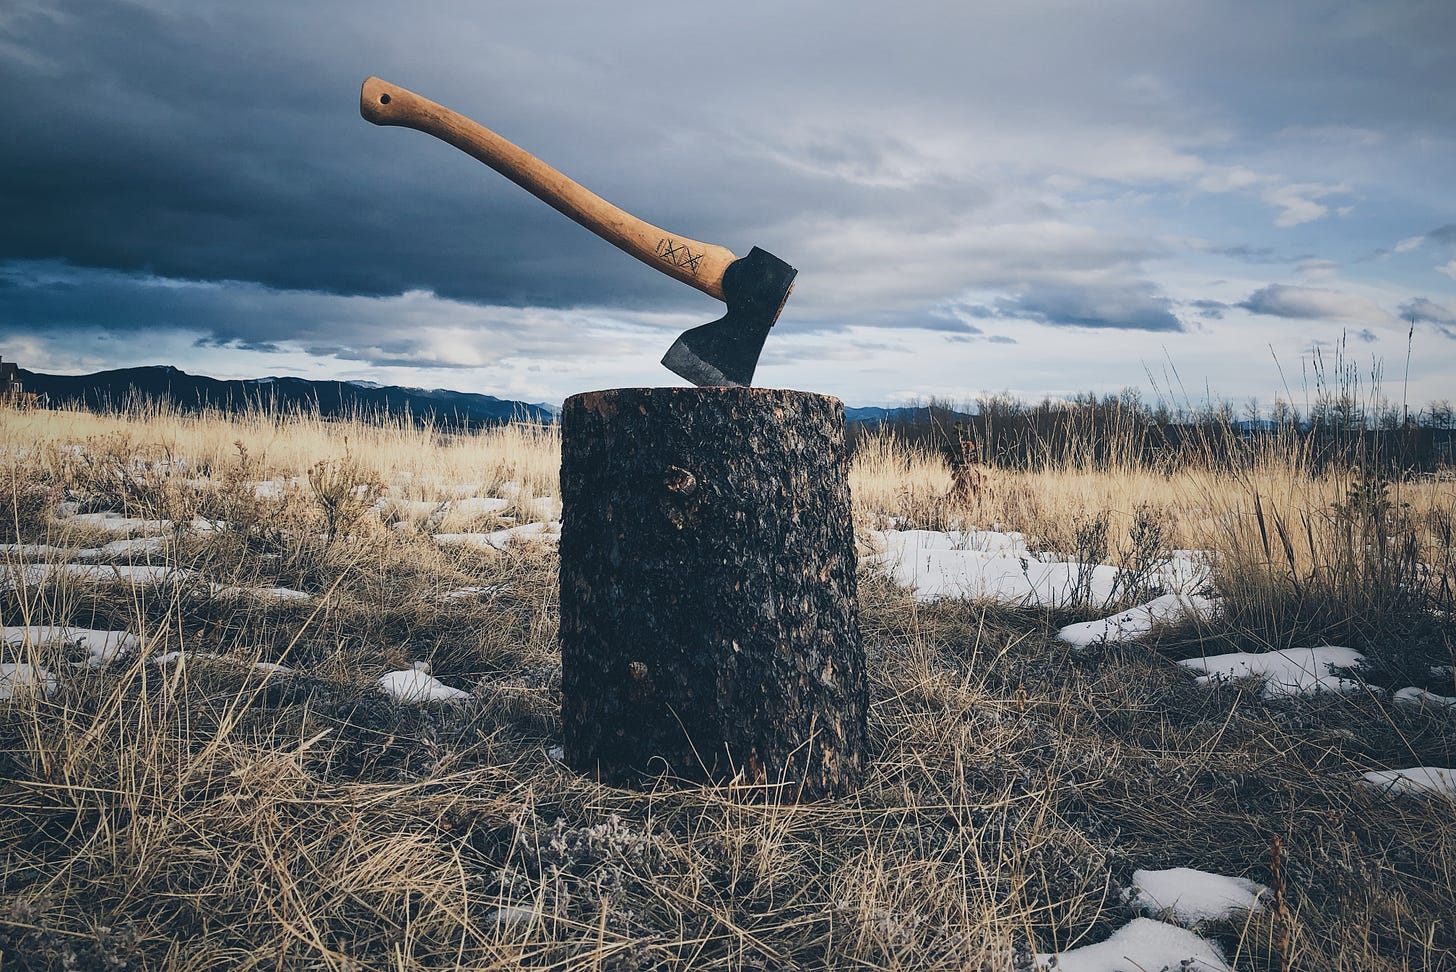 An axe sunk into a stump in the middle of a field with patches of snow. Mountains in the distance